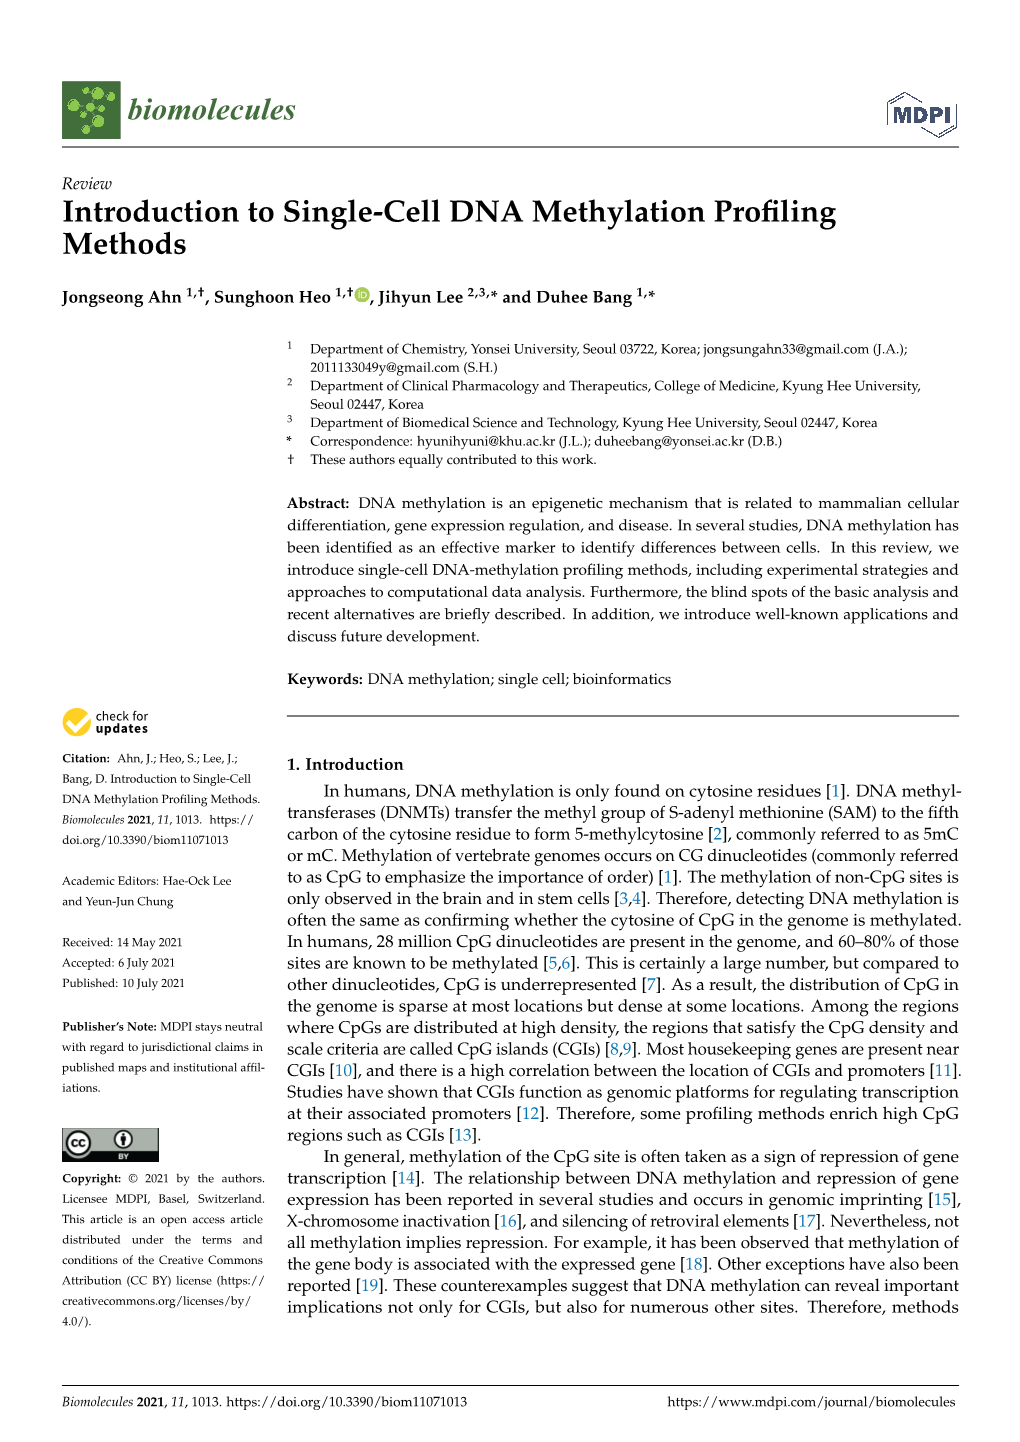 Introduction to Single-Cell DNA Methylation Profiling Methods